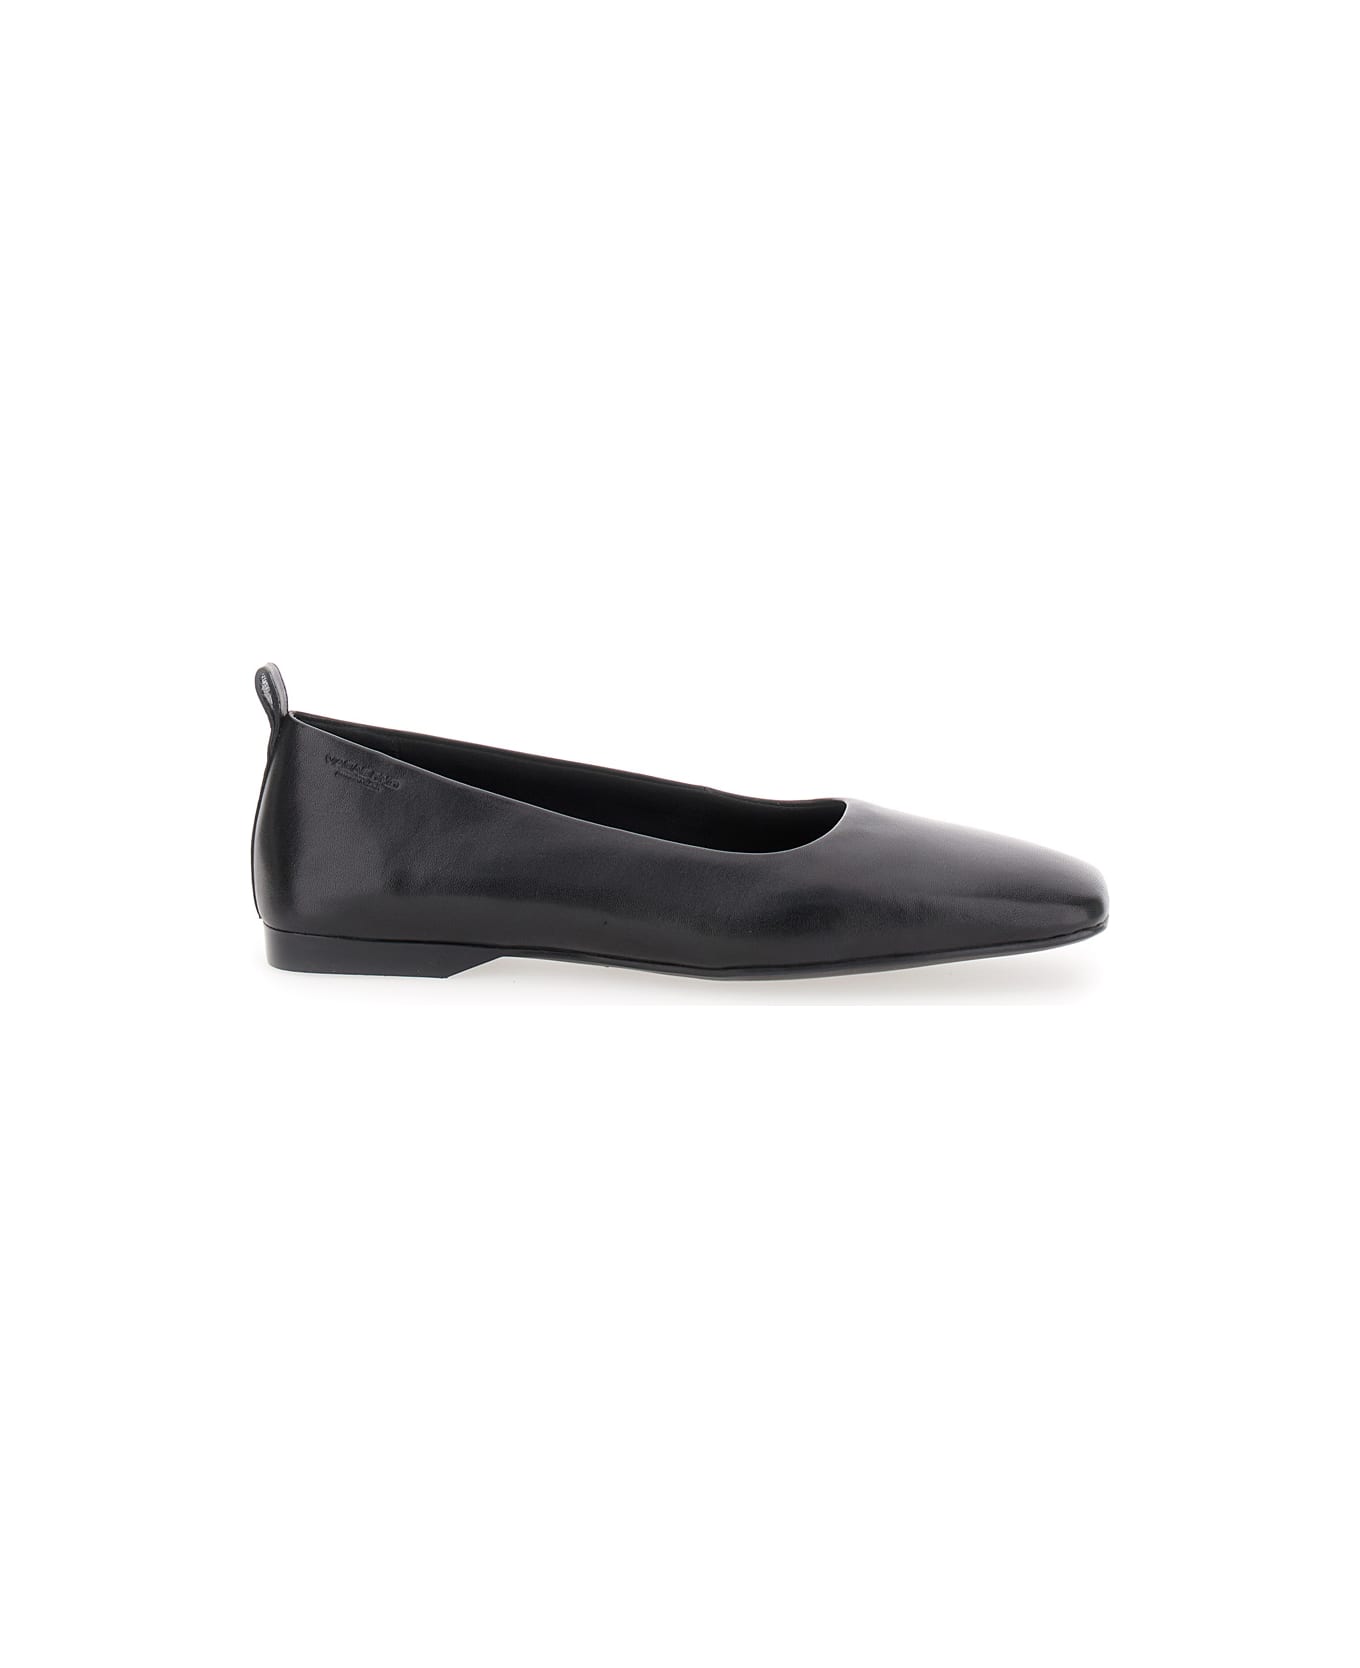 Vagabond 'delia' Black Ballet Flats With Squared Toe In Leather Woman - Black